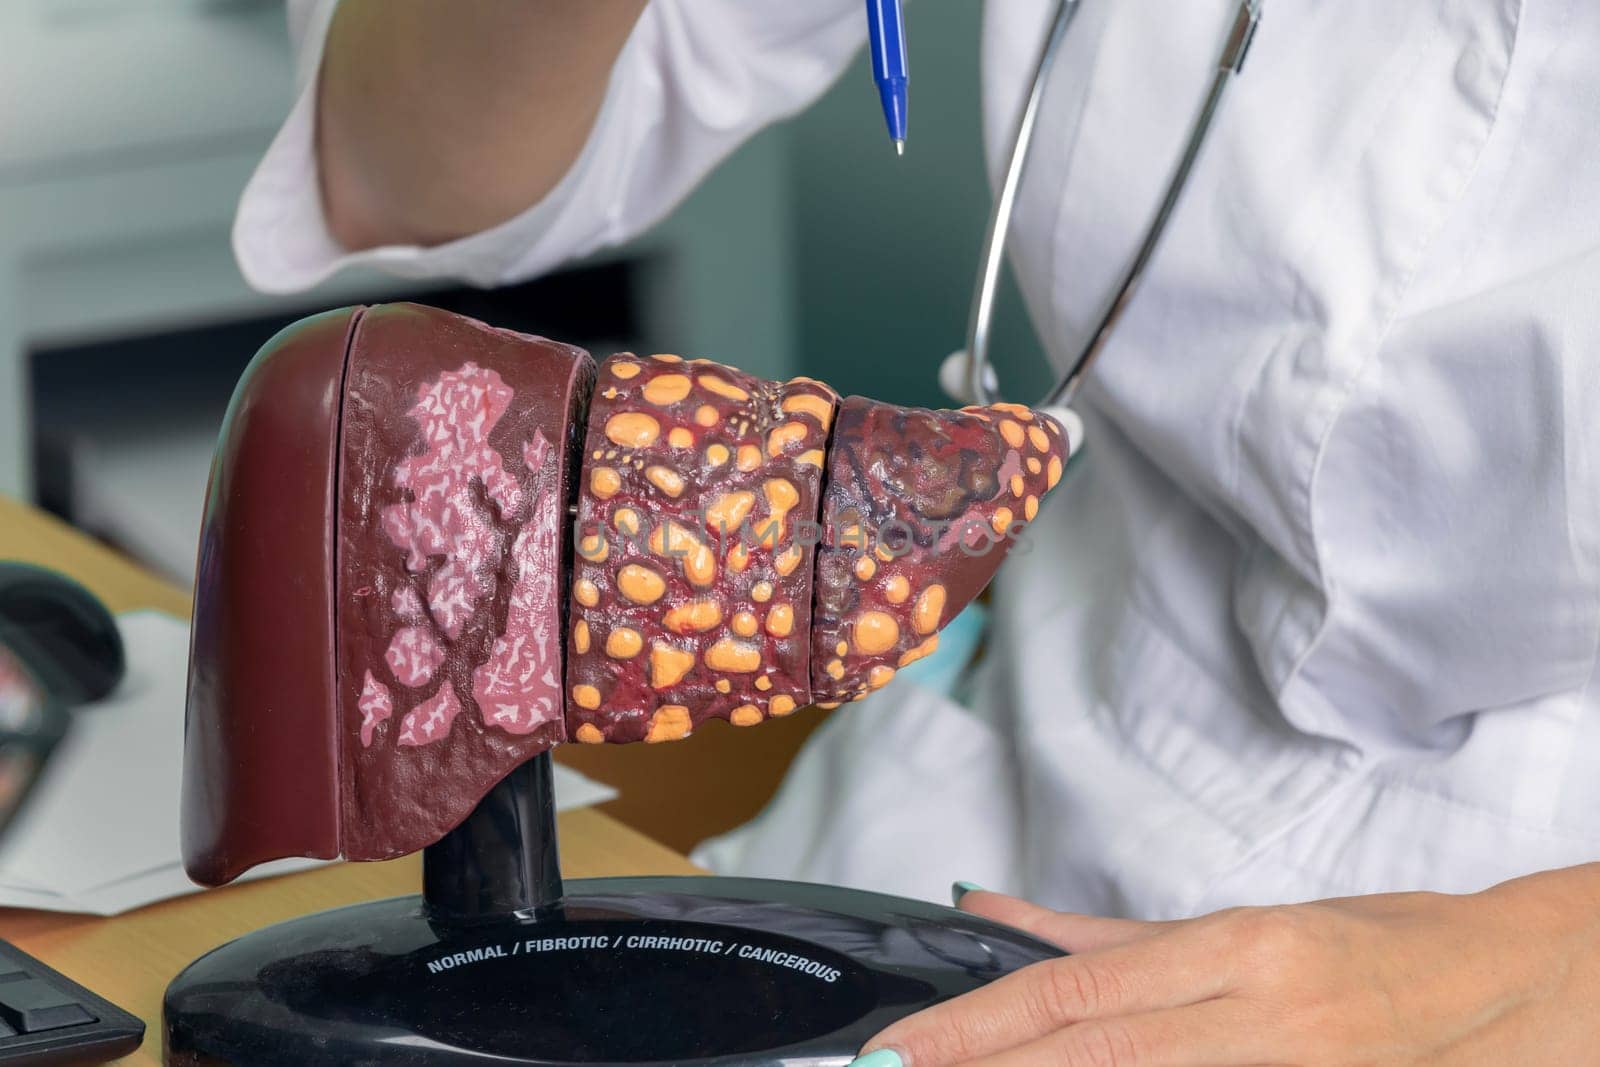 Close up of model of human liver with words normal, fibrotic, cirrhotic, cancerous. female doctor shows the patient a stage 4 liver: normal, fibrous, cirrhotic, malignant. The liver means your health and your life. by Leoschka